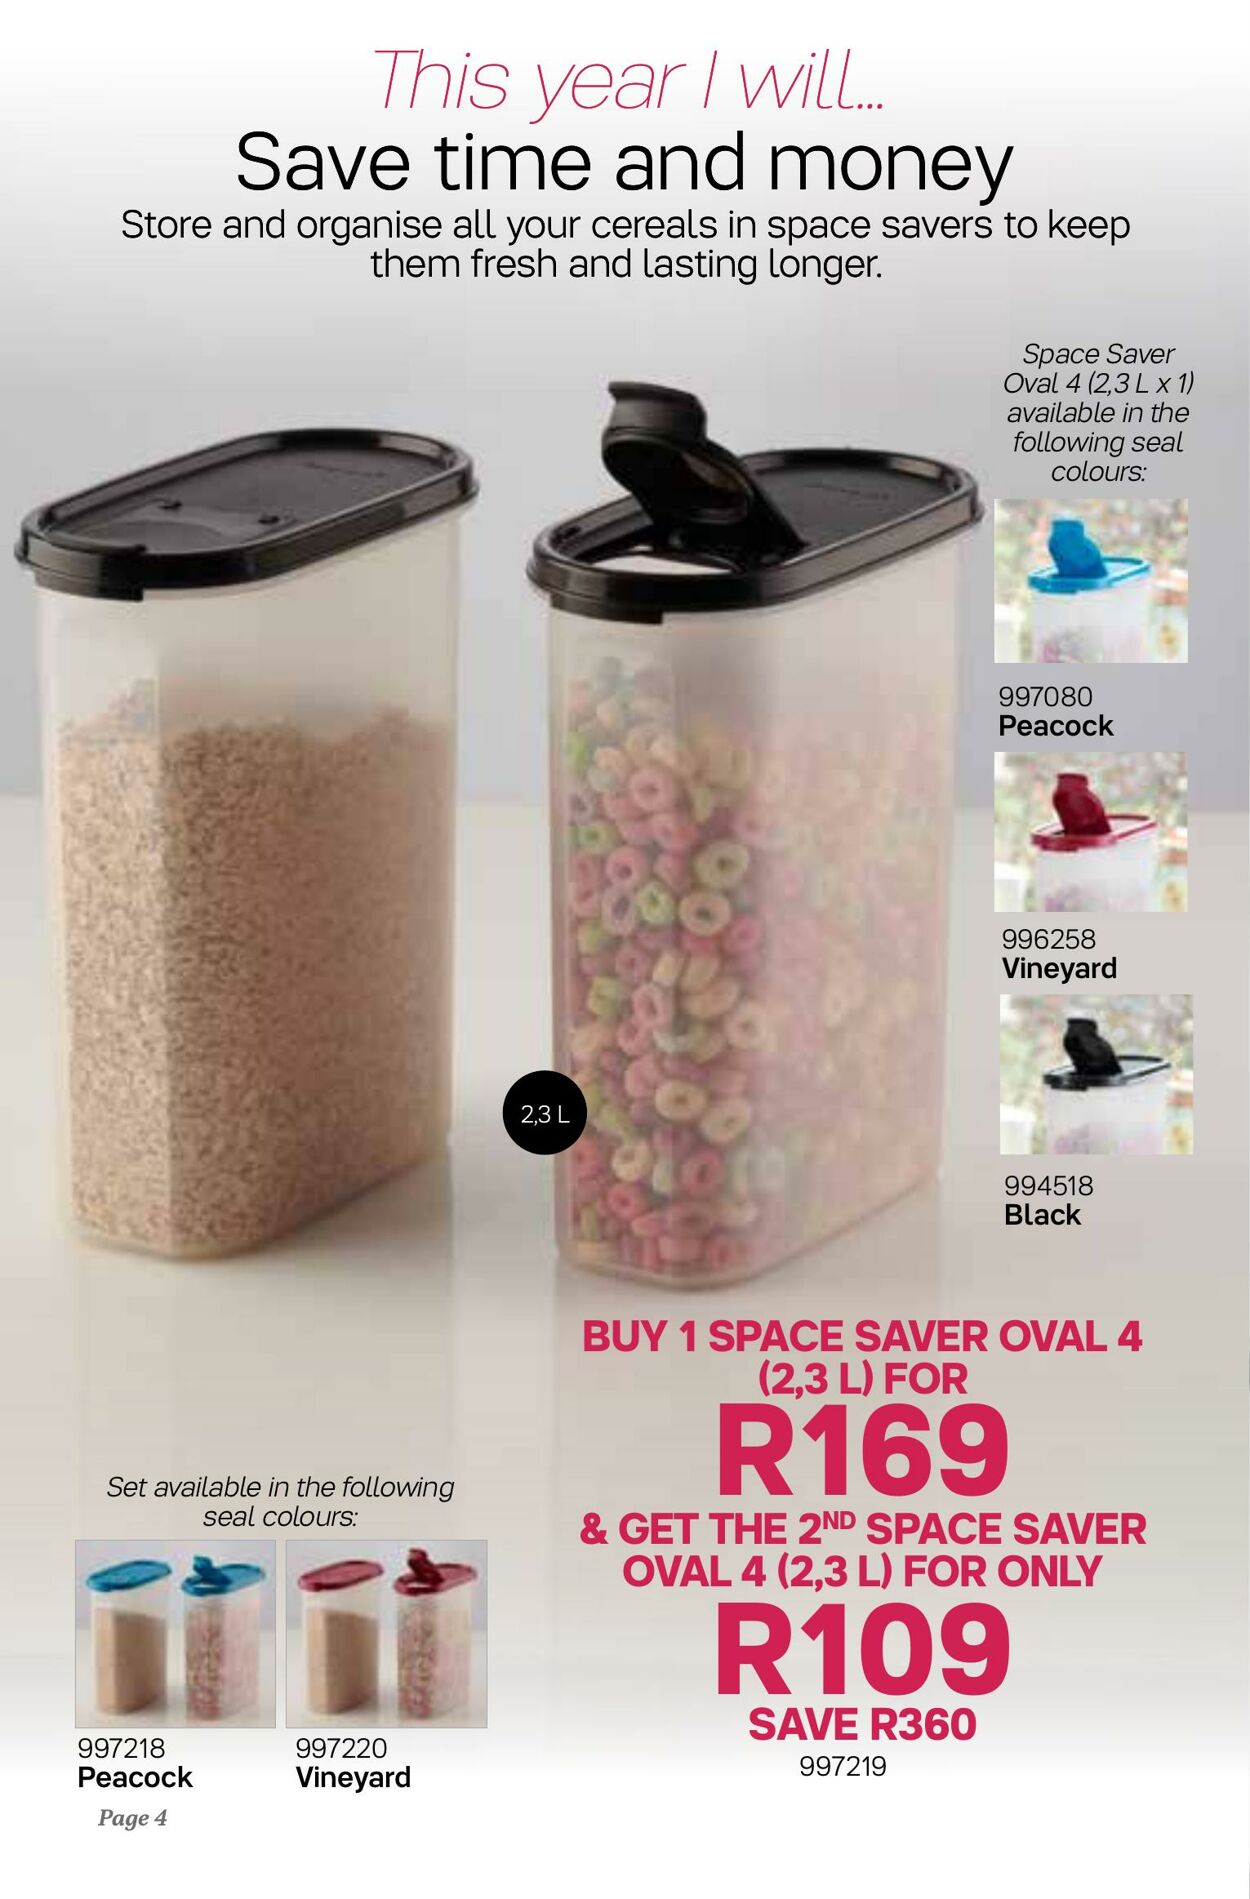 Tupperware Catalogue with Current Prices 27.11 - 31.12